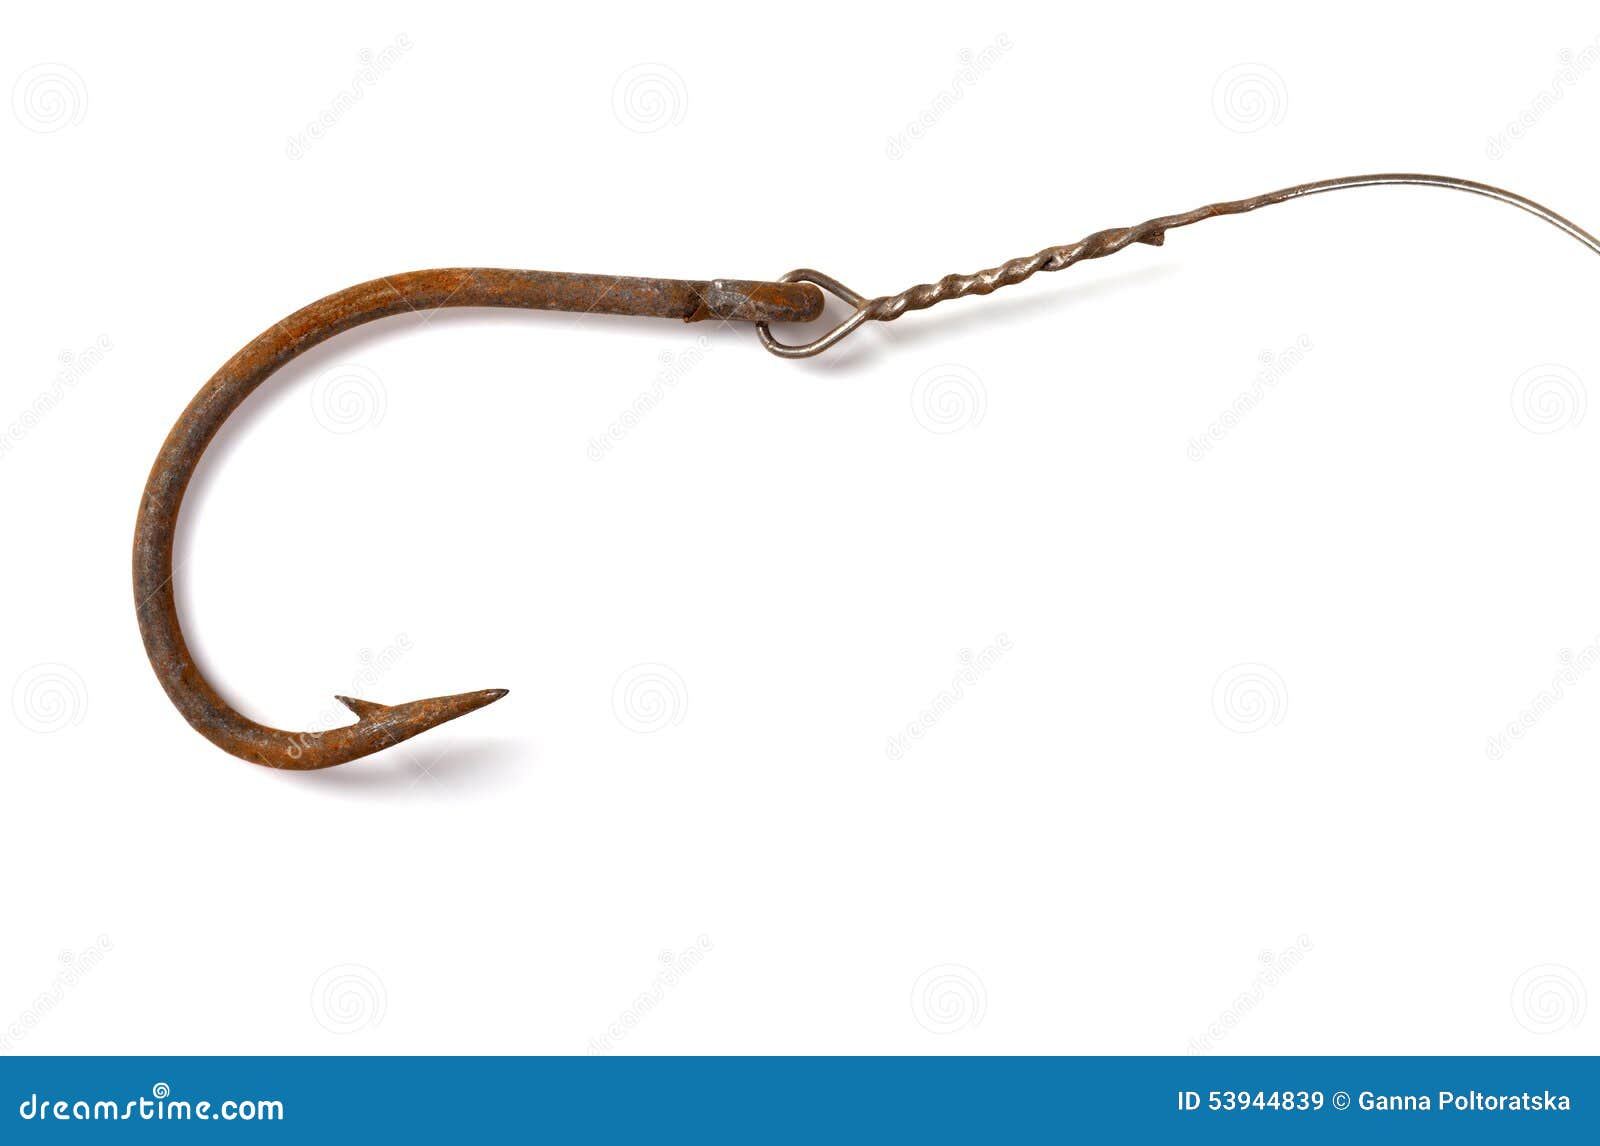 Old Fishing Hook Stock Photos, Images & Pictures